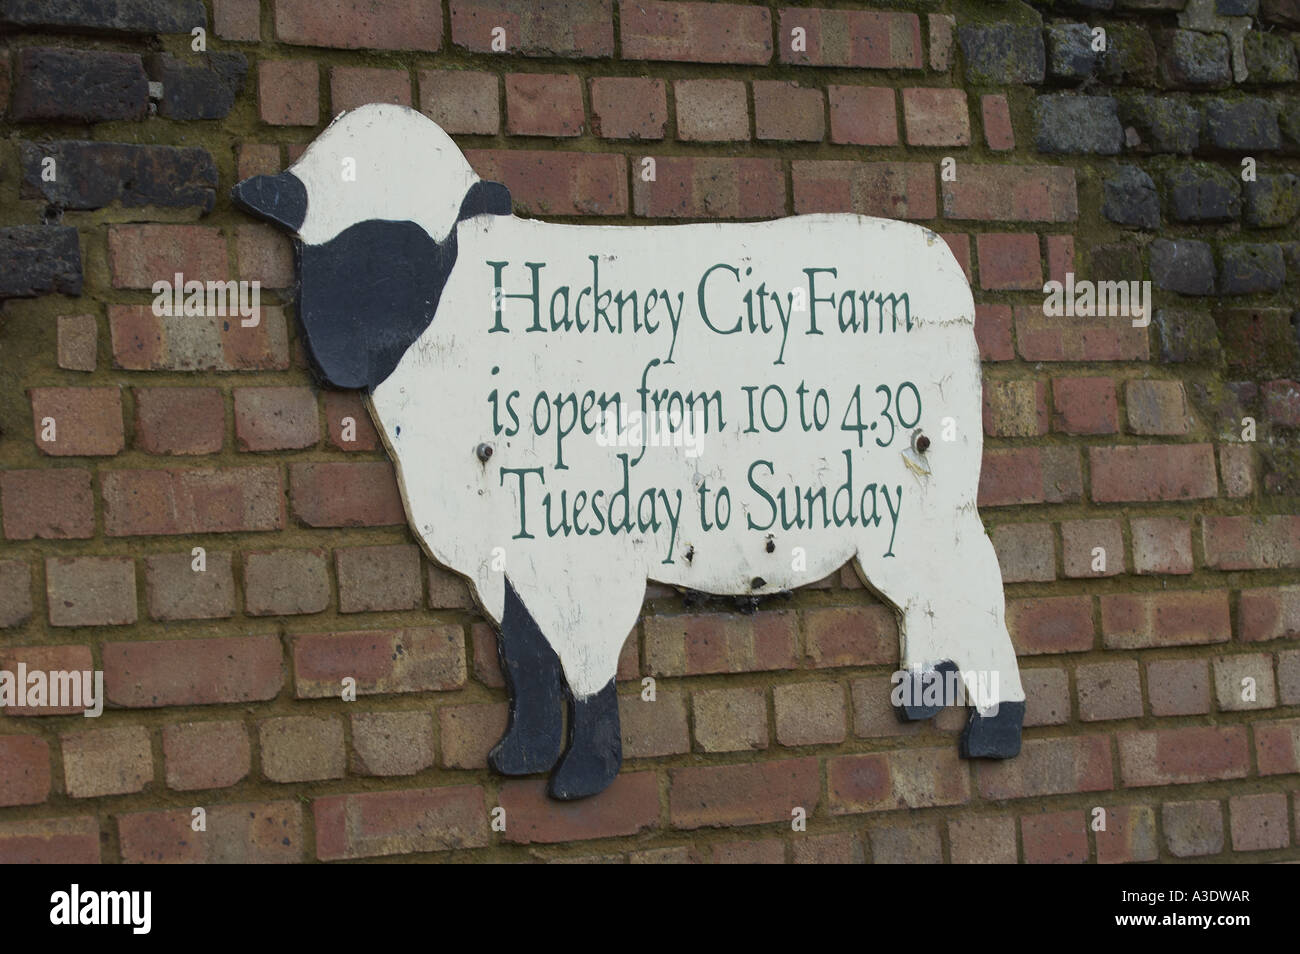 Hackney City Farm sign in the shape of a sheep Hackney East London Stock Photo